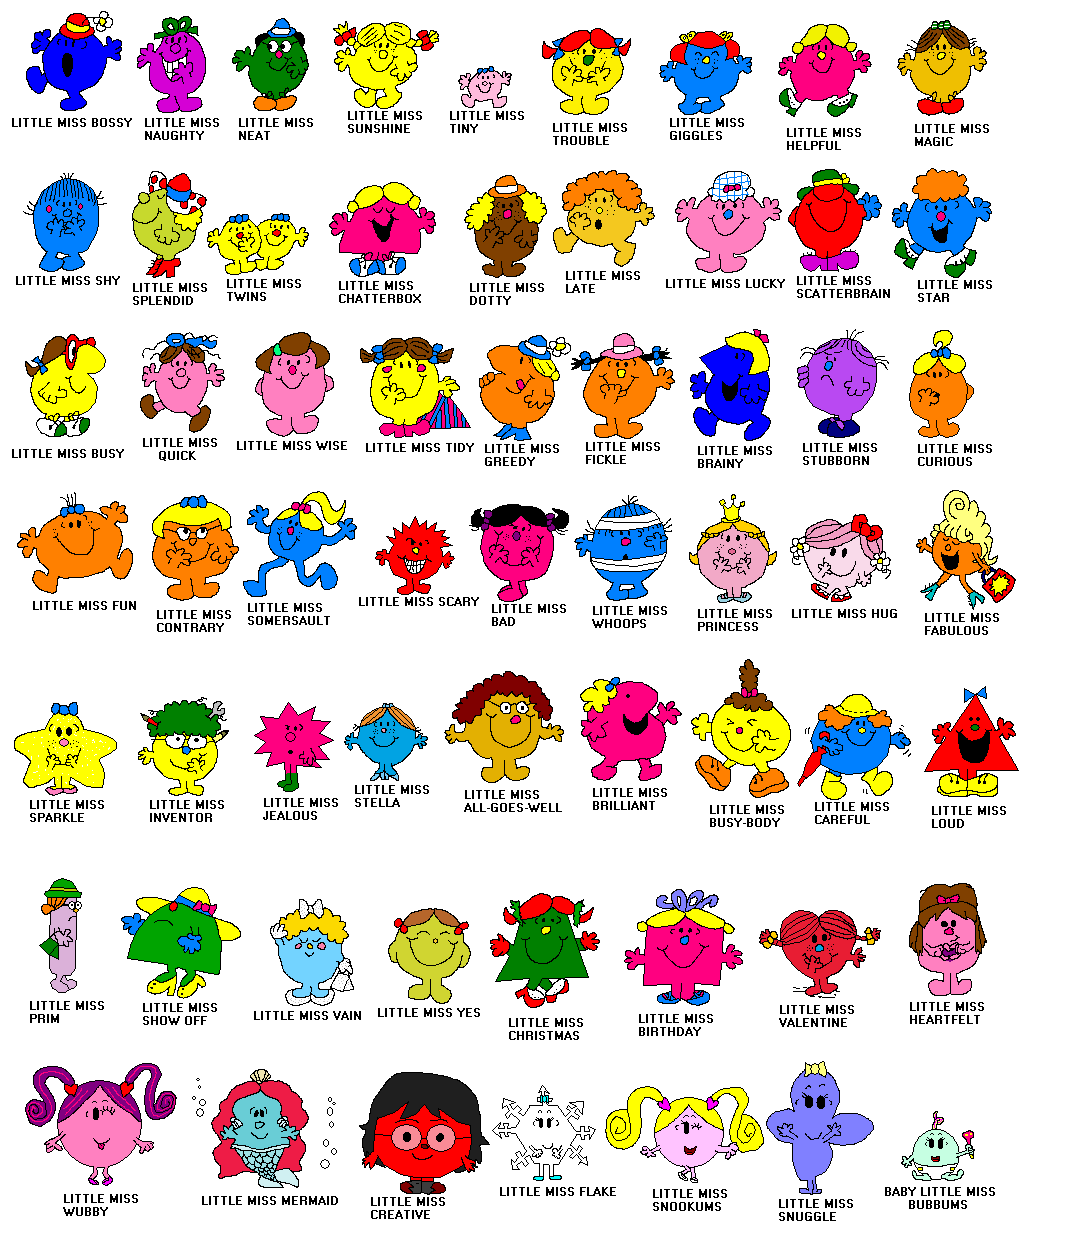 Baby Little Miss Bubbums back cover by 2Funny89 on DeviantArt